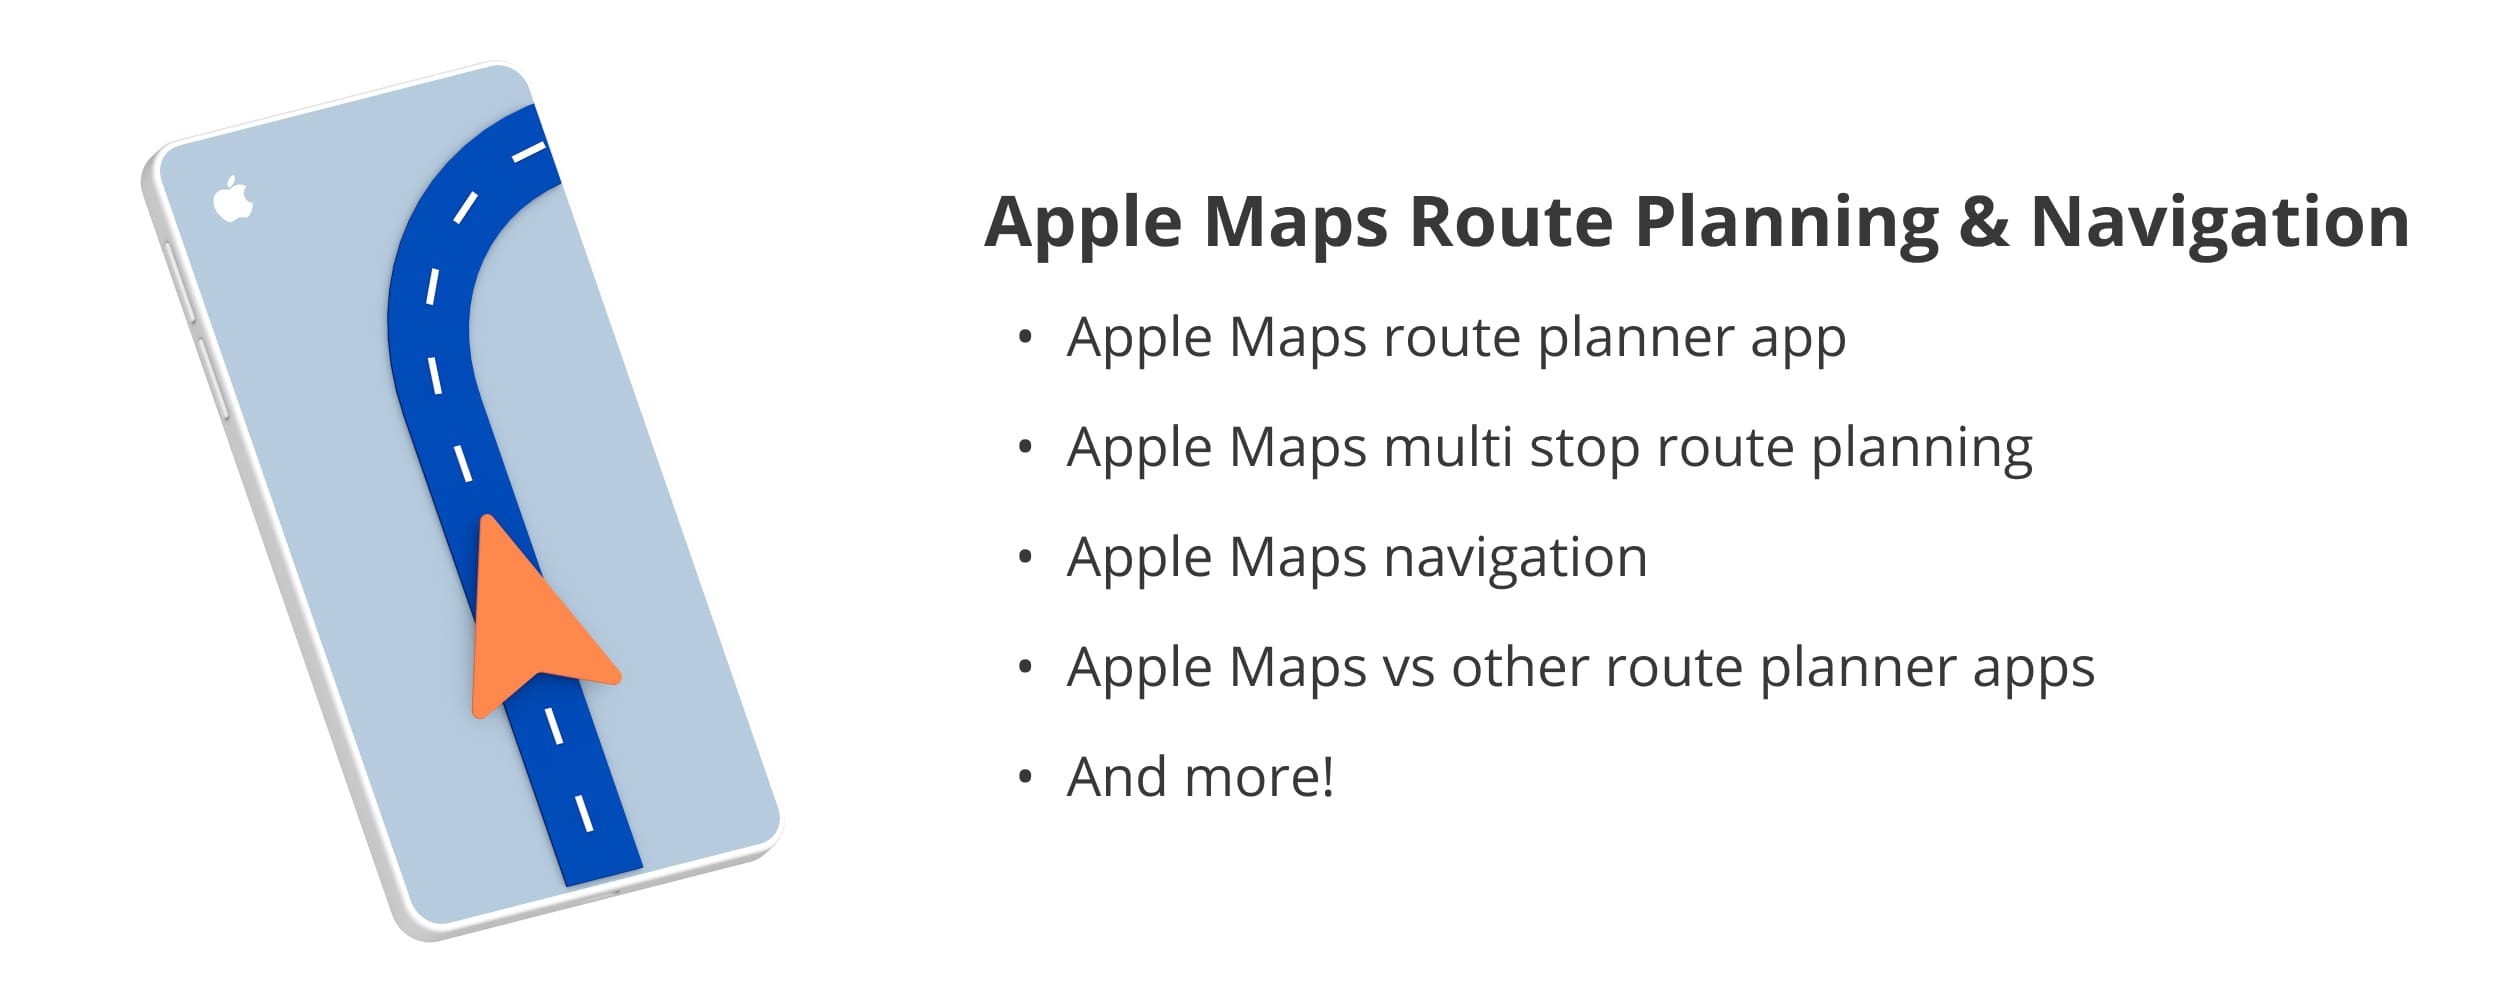 Apple Maps multi-stop route planner and navigation app.